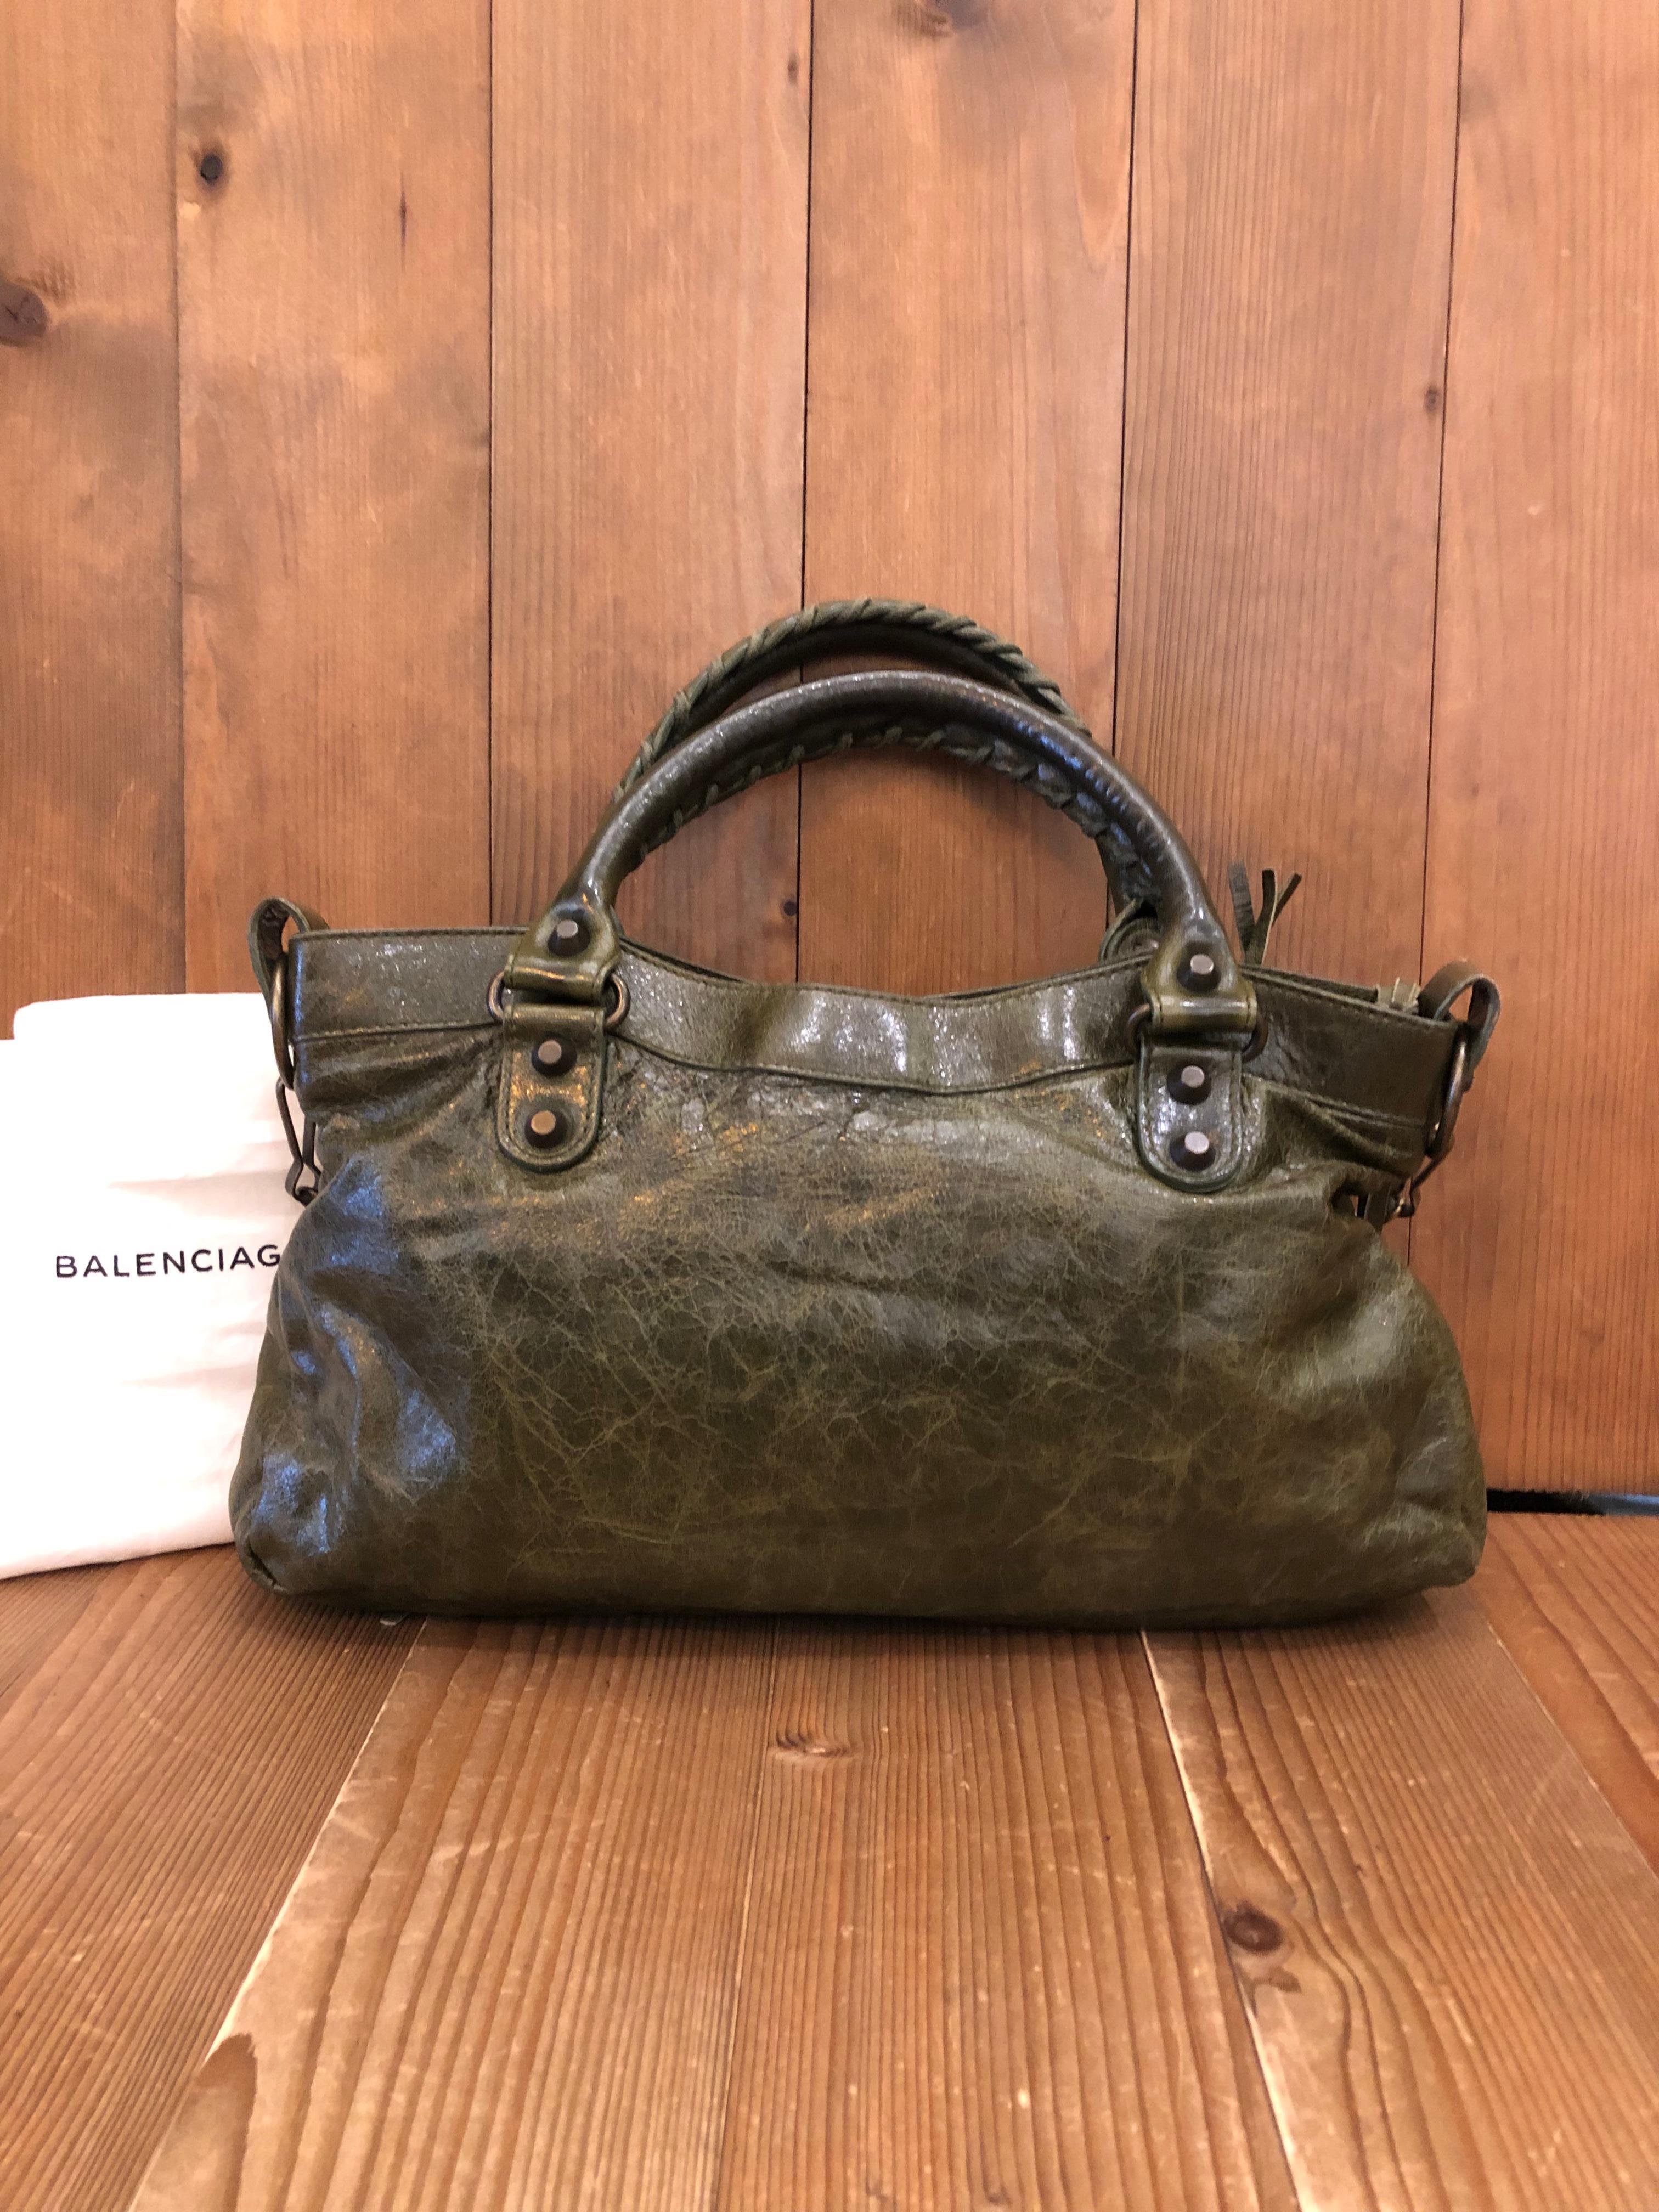 This Balenciaga First bag is Crafted of khaki distressed lambskin leather featuring hand stitched handles and a removable shoulder strap of the same leather and a zip pocket at the front. Zipper top closure. Interior is lined with fabric and has one